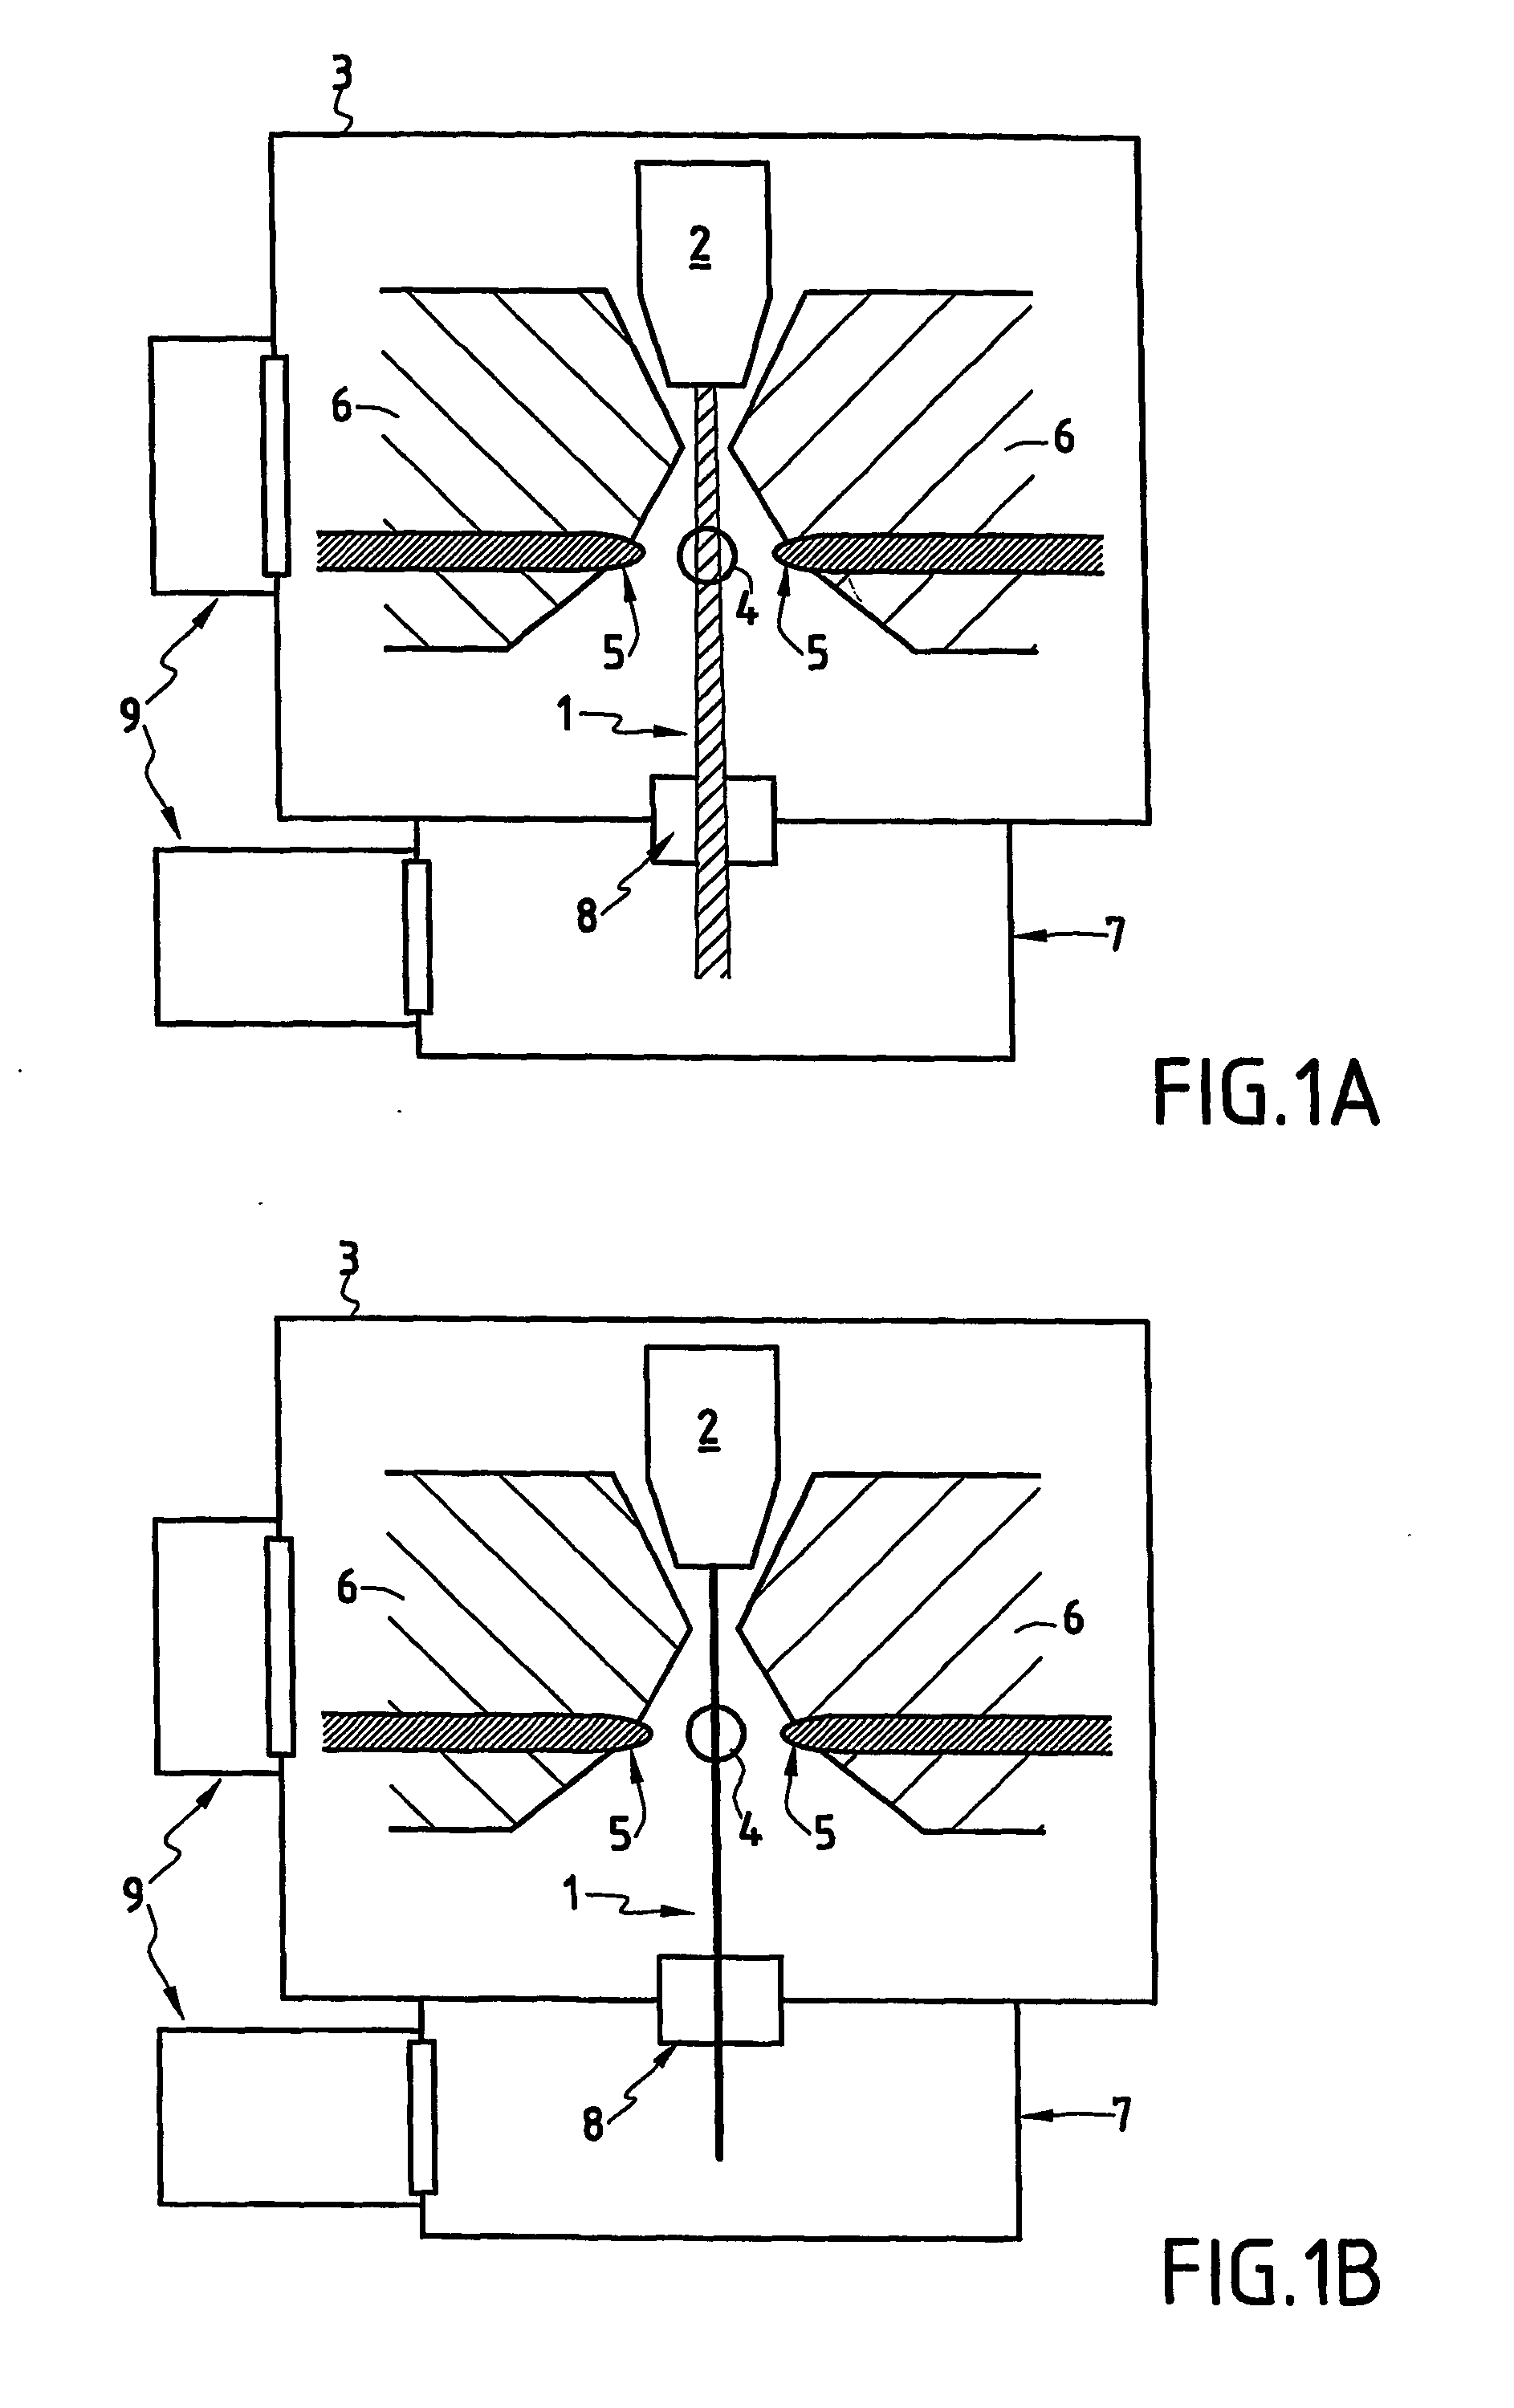 Method and Device for Producing Extreme Ultraviolet Radiation or Soft X-Ray Radiation